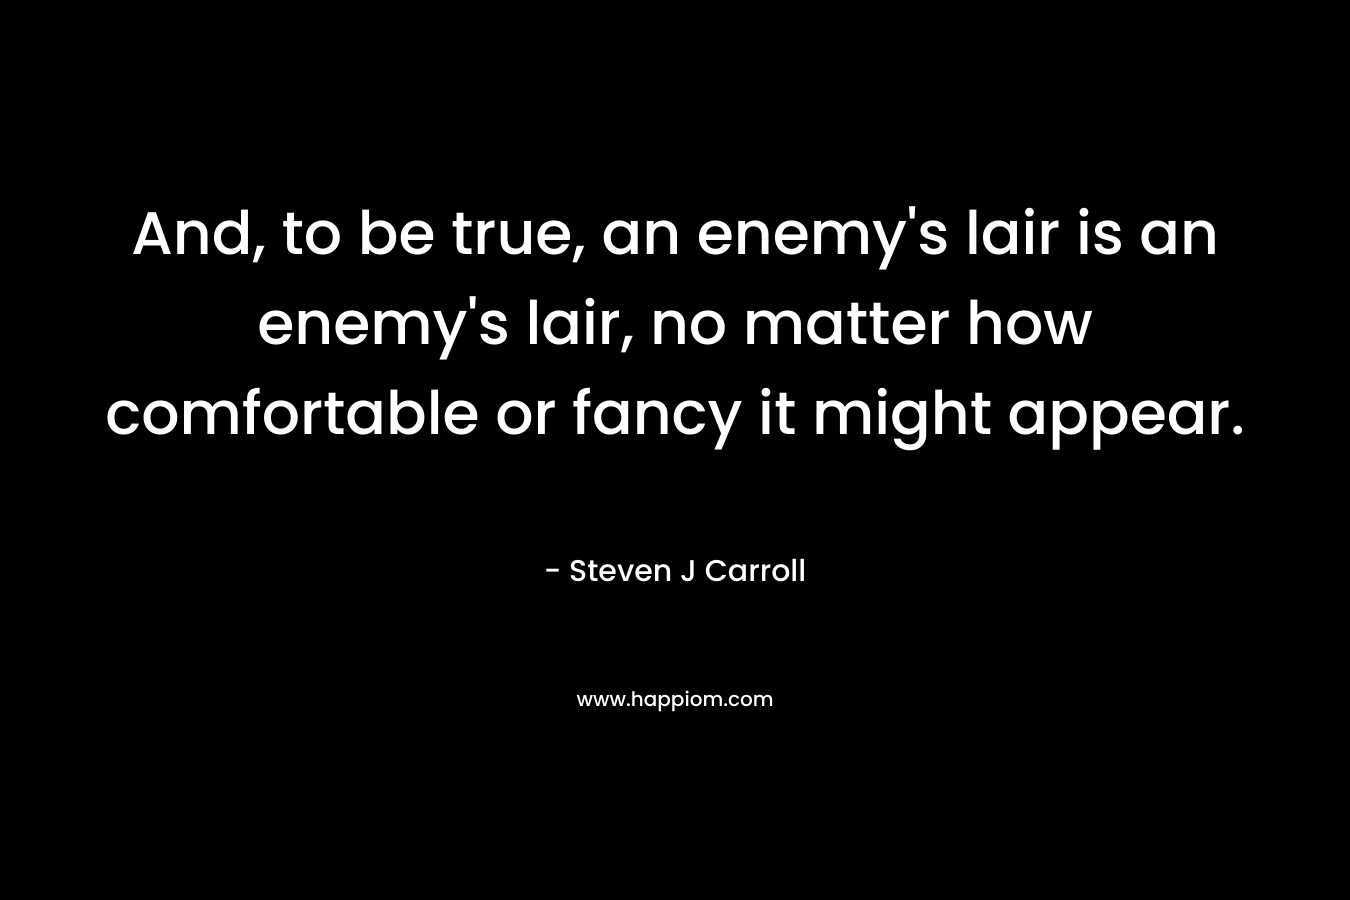 And, to be true, an enemy’s lair is an enemy’s lair, no matter how comfortable or fancy it might appear. – Steven J Carroll